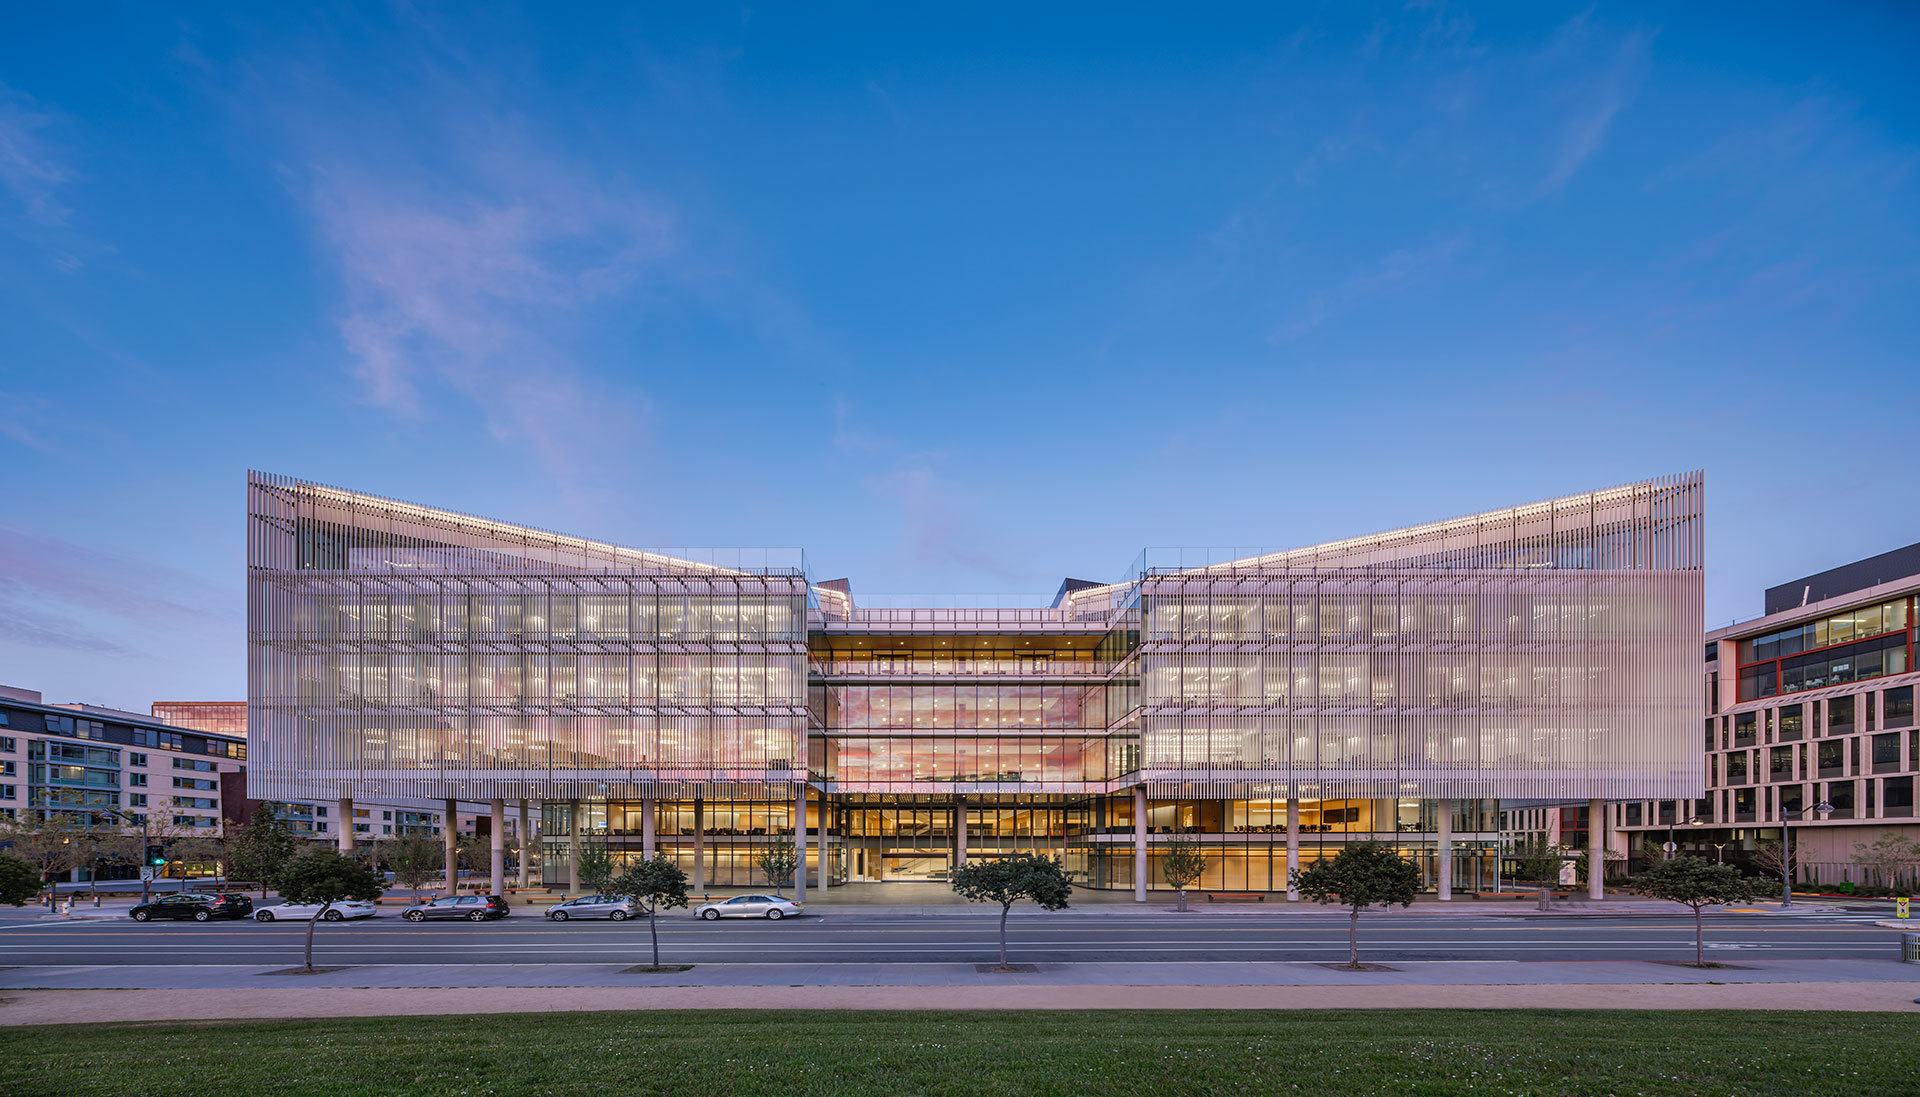 Exterior view of Weill Neurosciences Building at dusk.